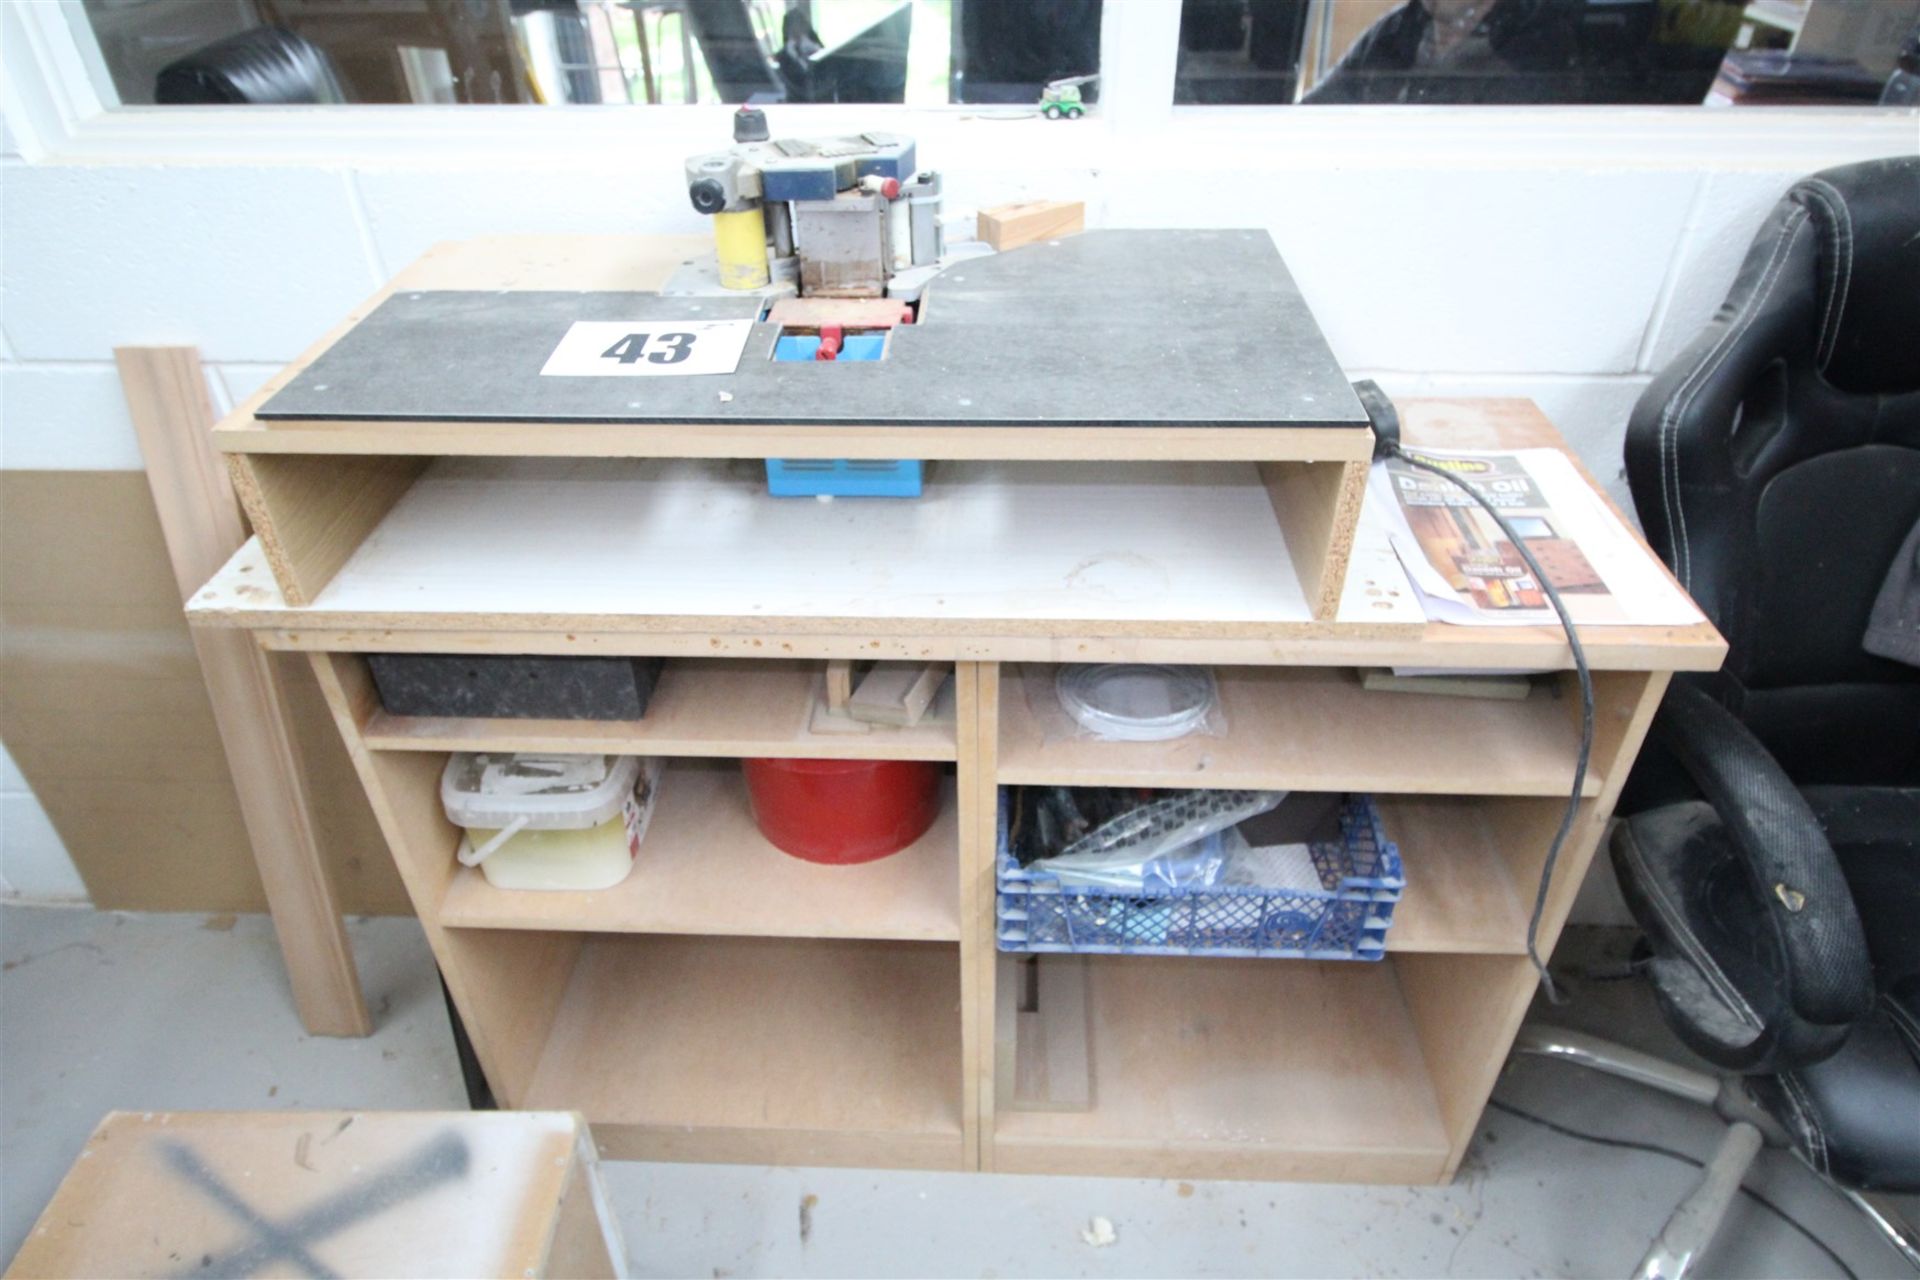 MDF MANUFACTURED CABINET & CONTENTS COMPLETE WITH TABLE TOP, HORIZONTAL 3INCH GLUE DISPENSER